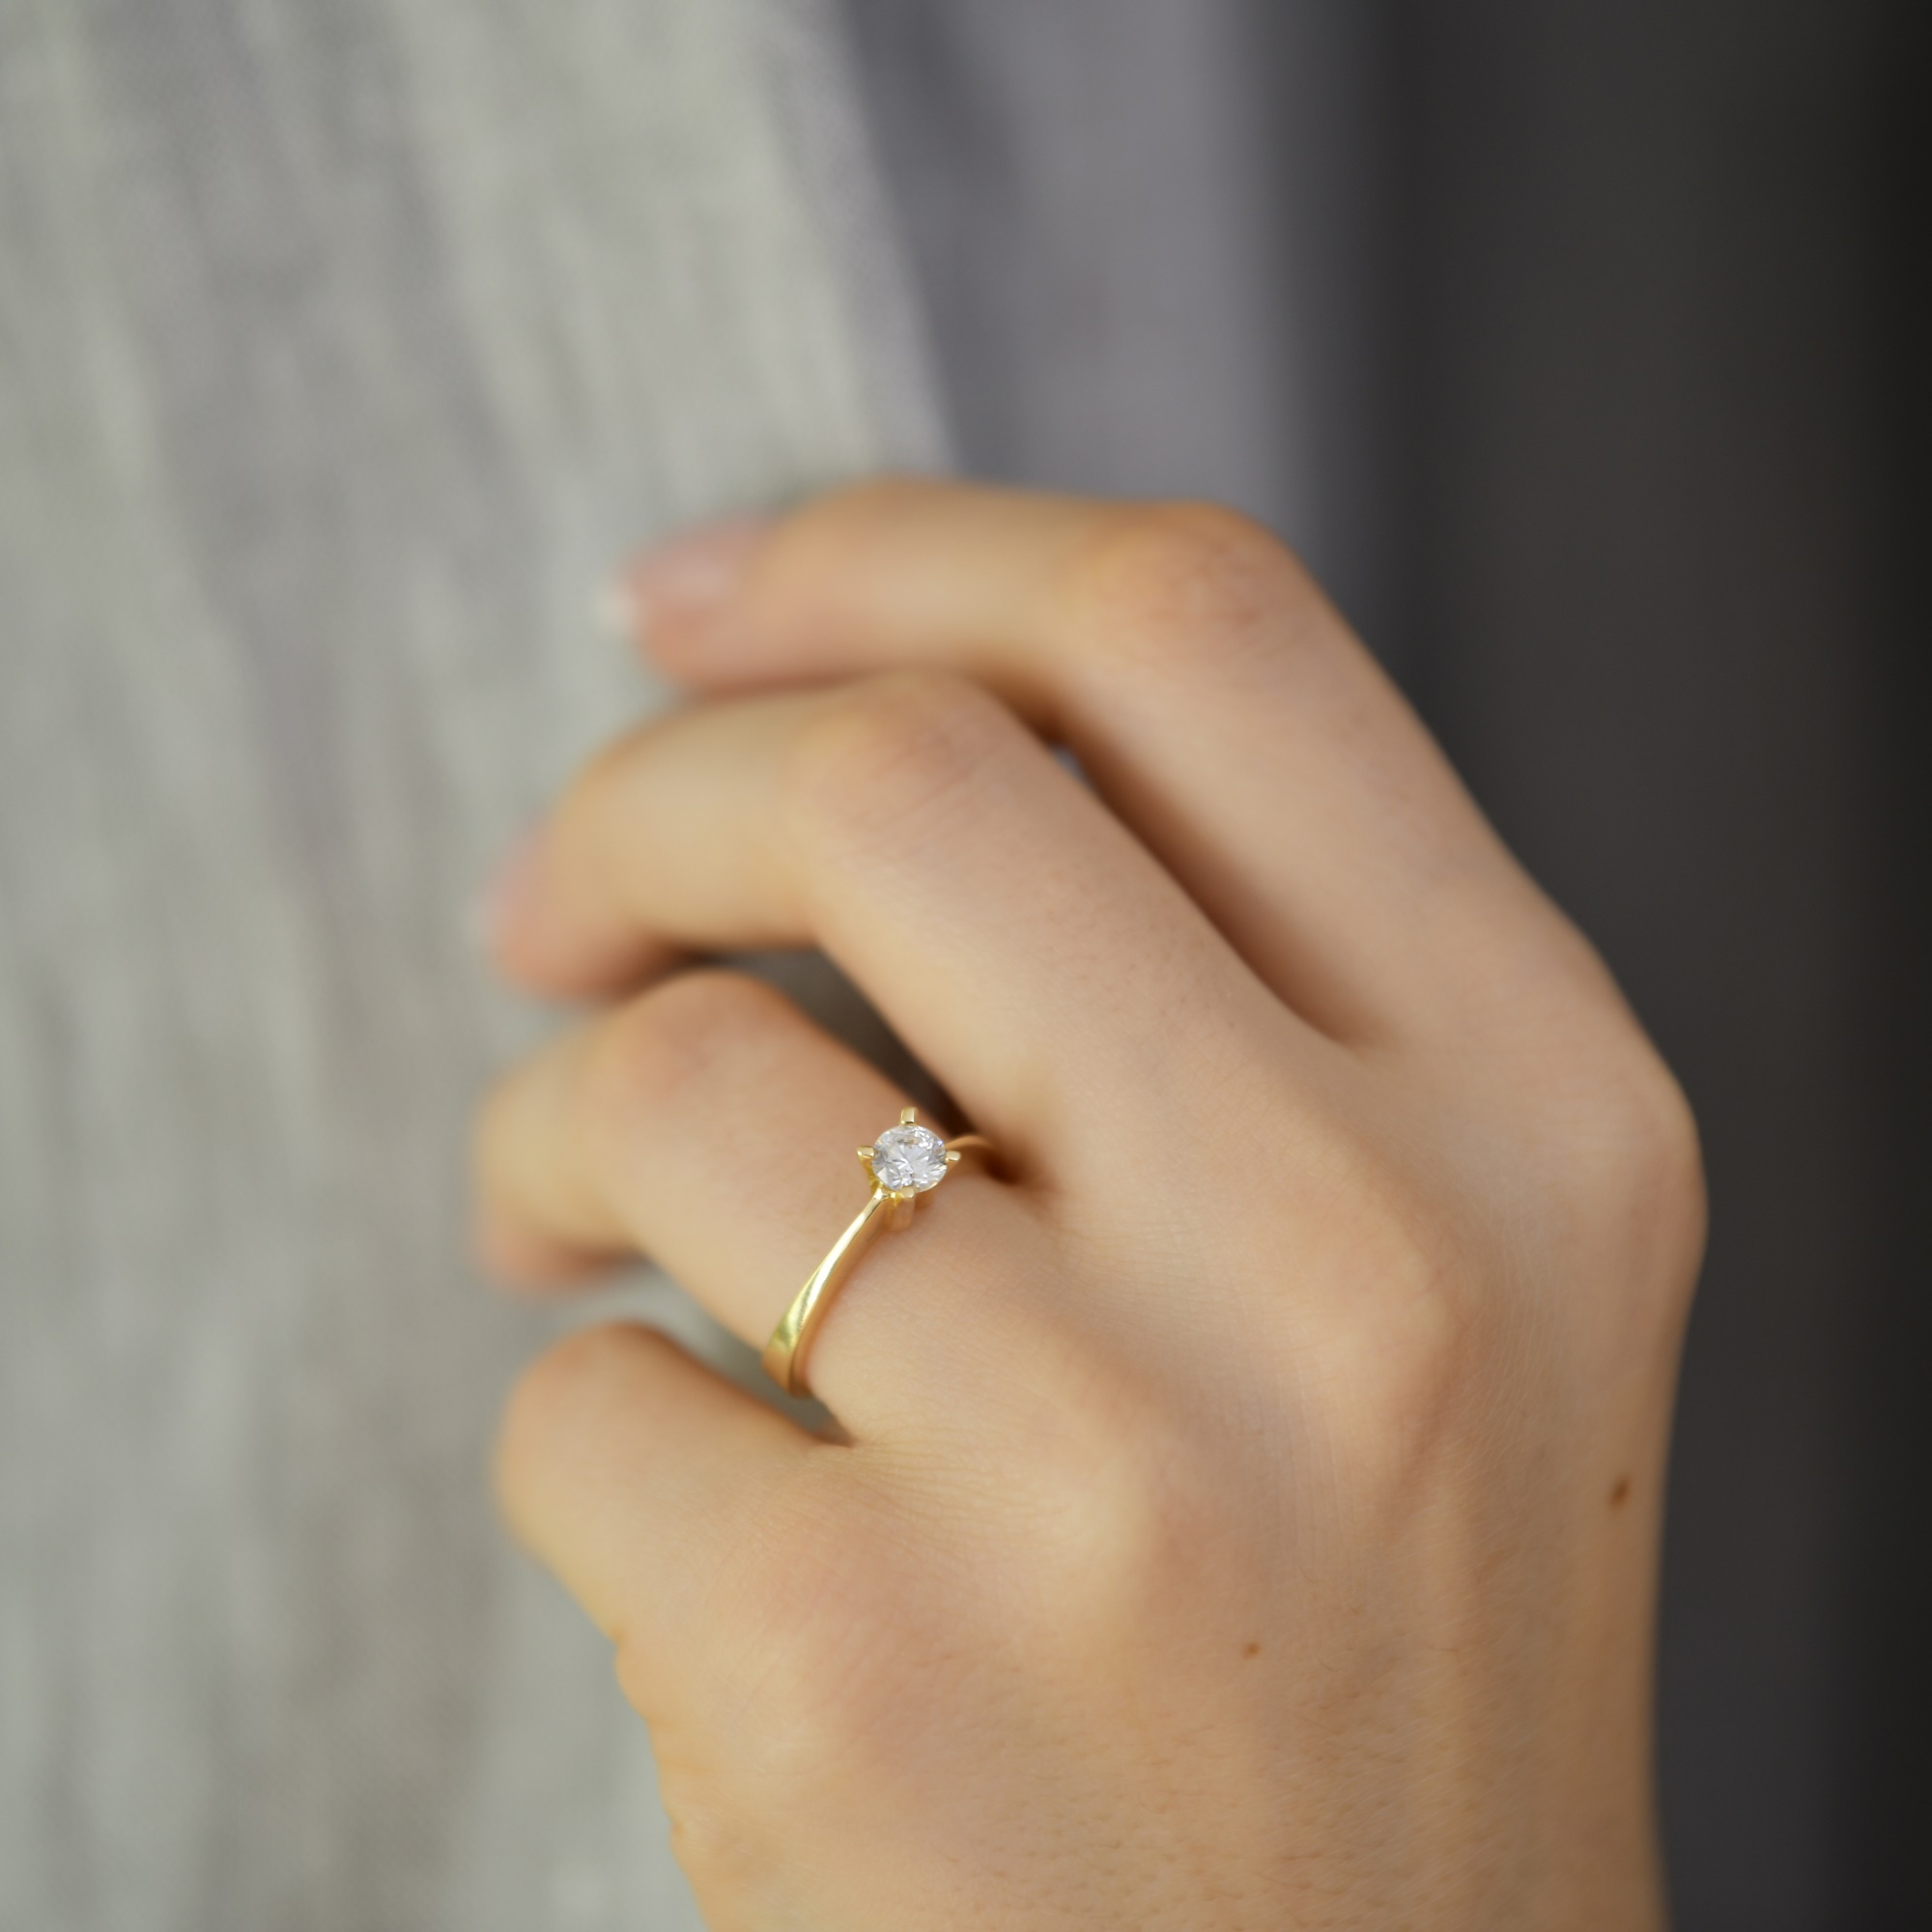 Your dreamy engagement ring